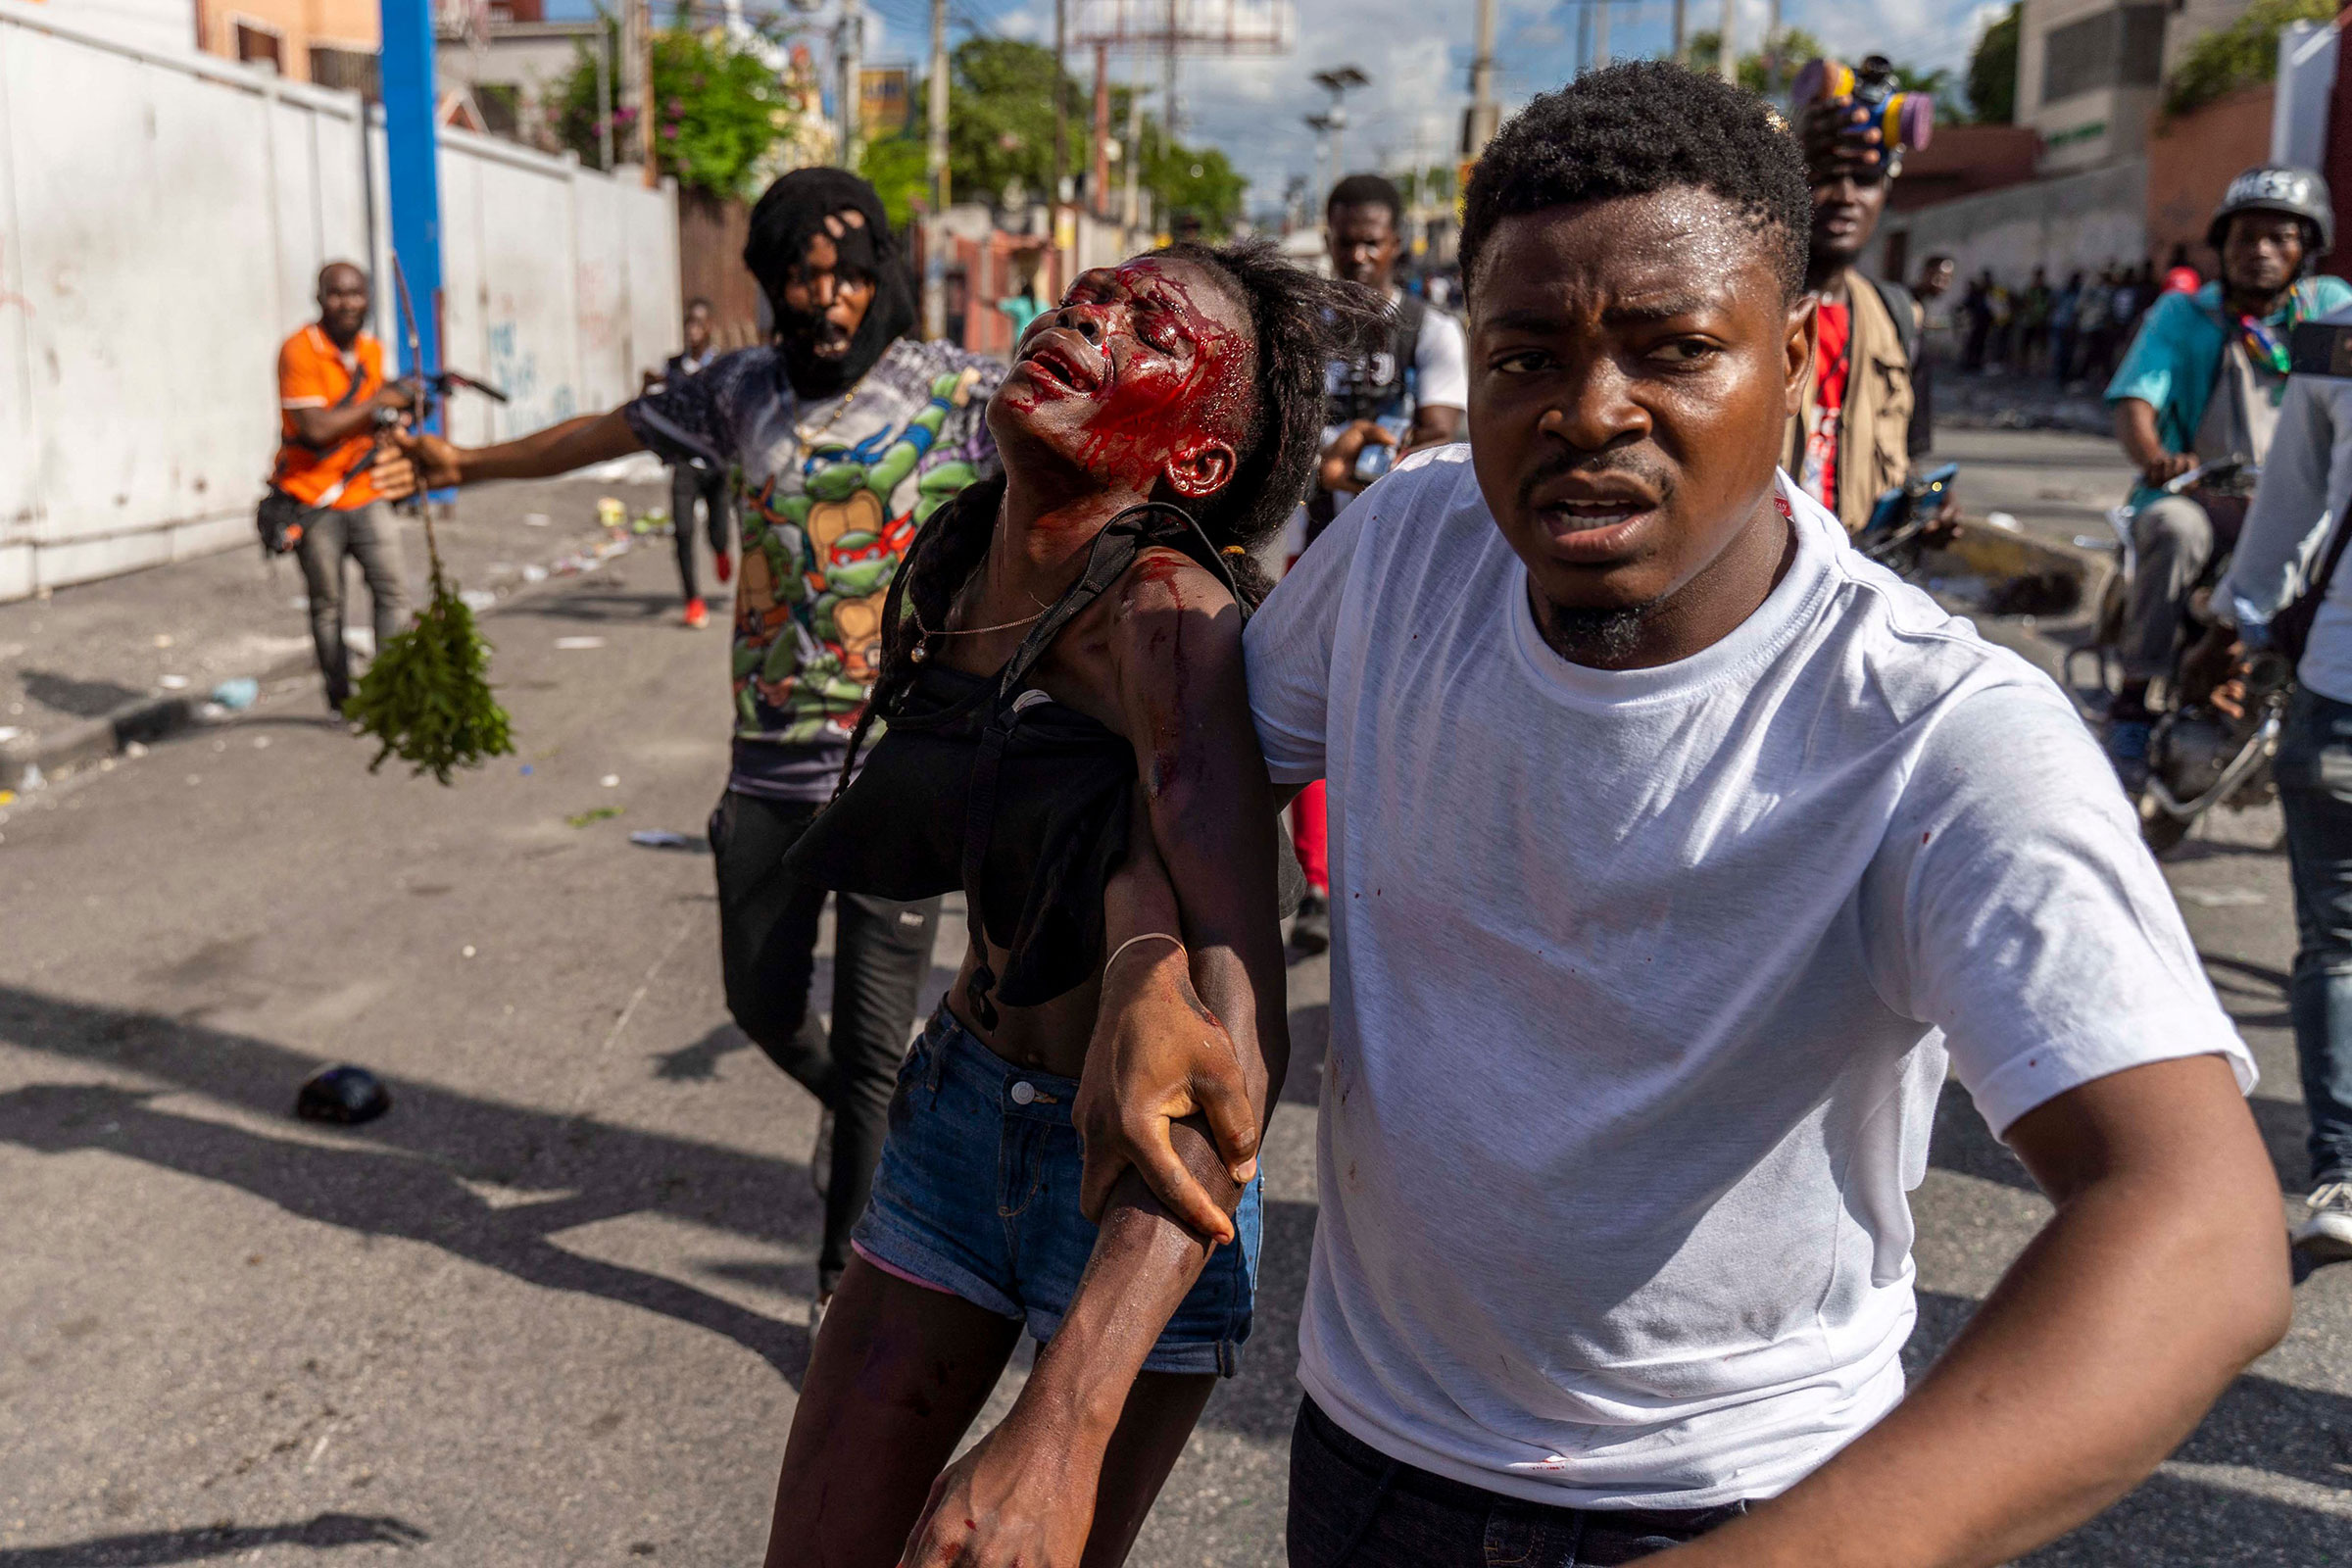 A man assists an injured woman during a protest against Haitian Prime Minister Ariel Henry calling for his resignation, in Port-au-Prince, Haiti, on Oct. 10.